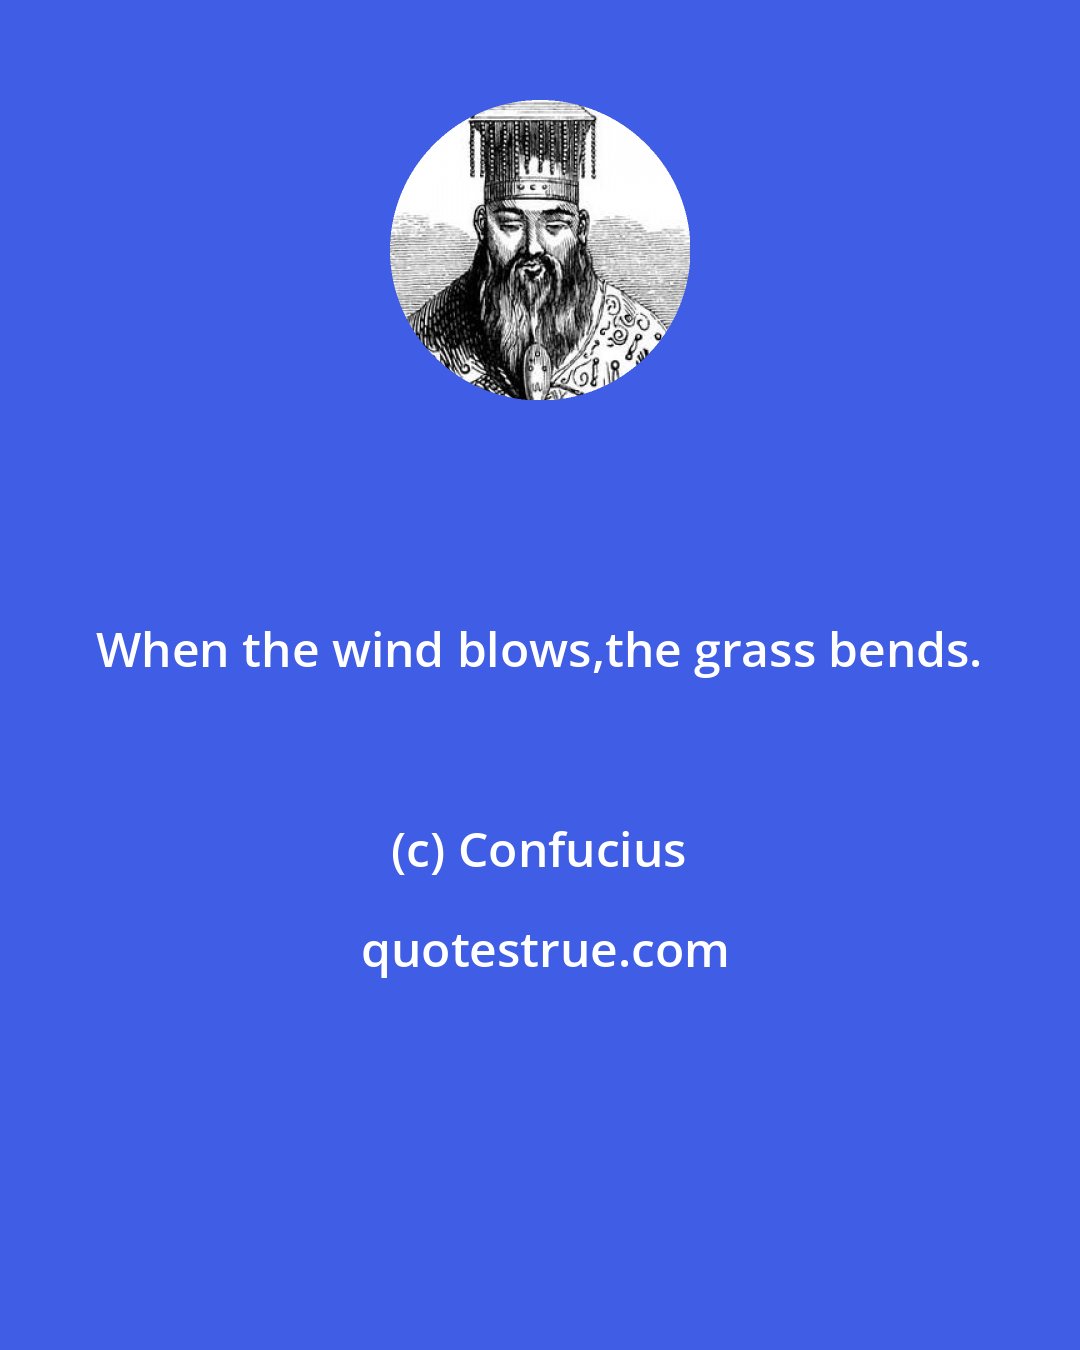 Confucius: When the wind blows,the grass bends.